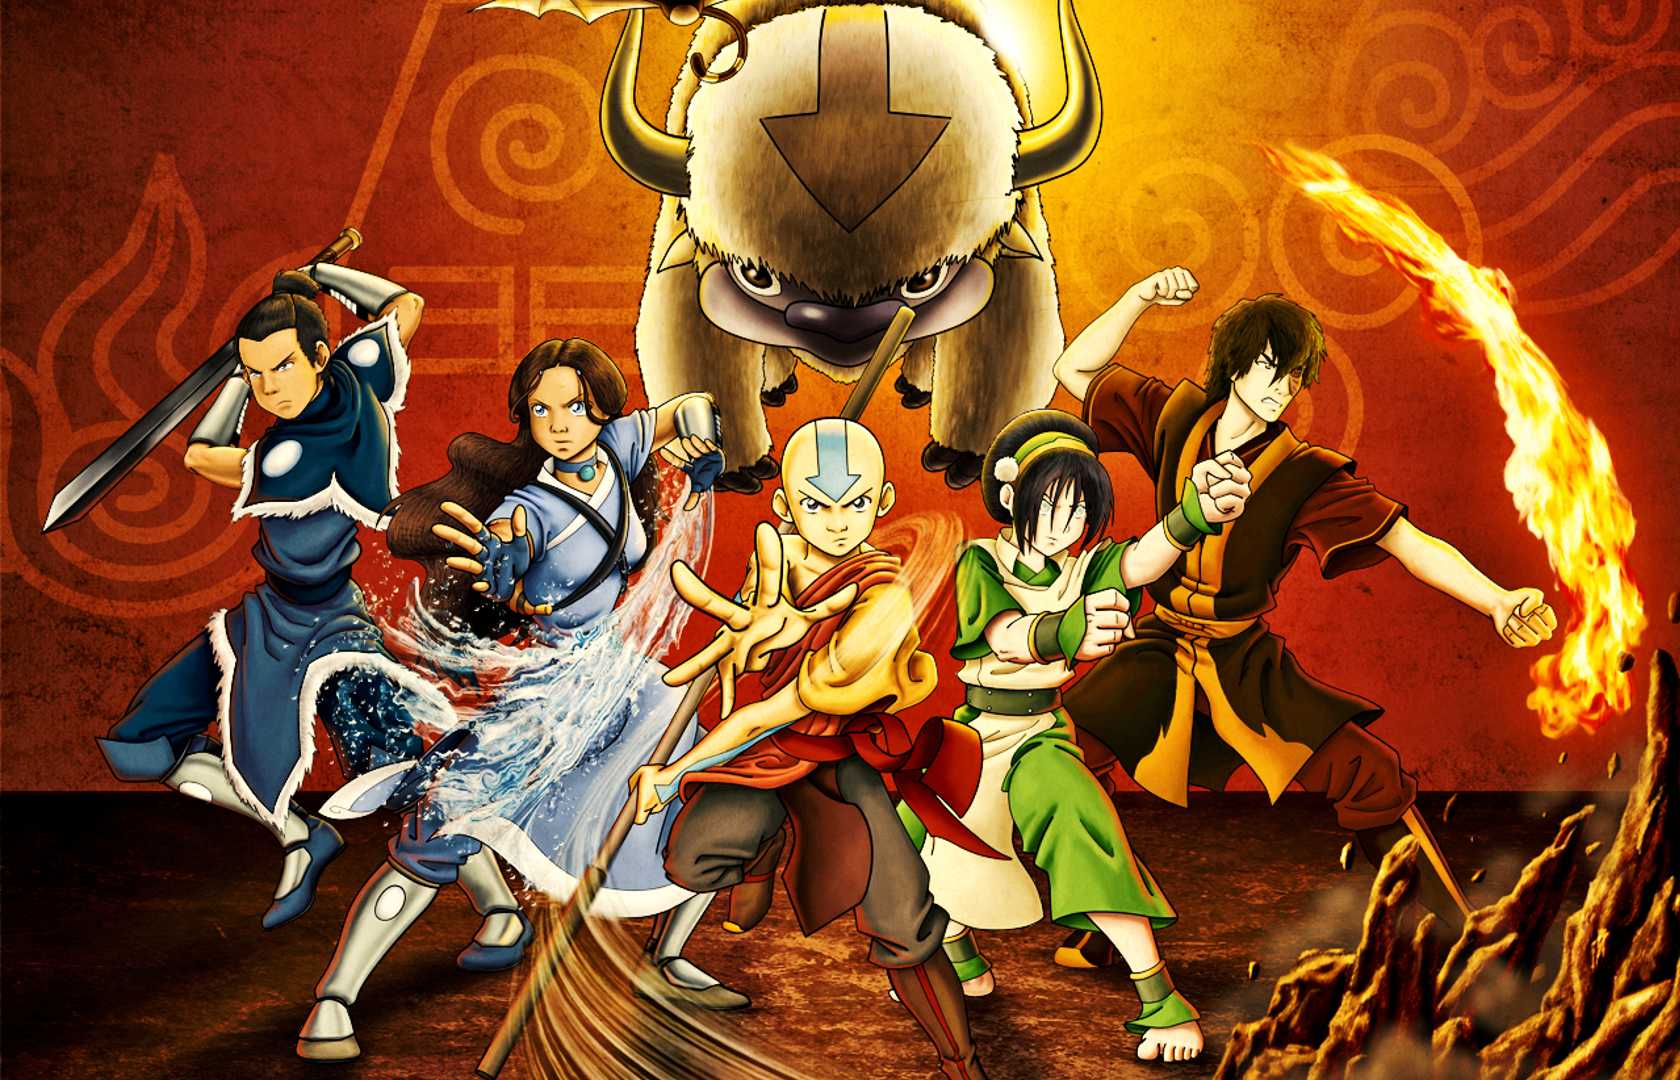 Avatar the last airbender | Pearltrees